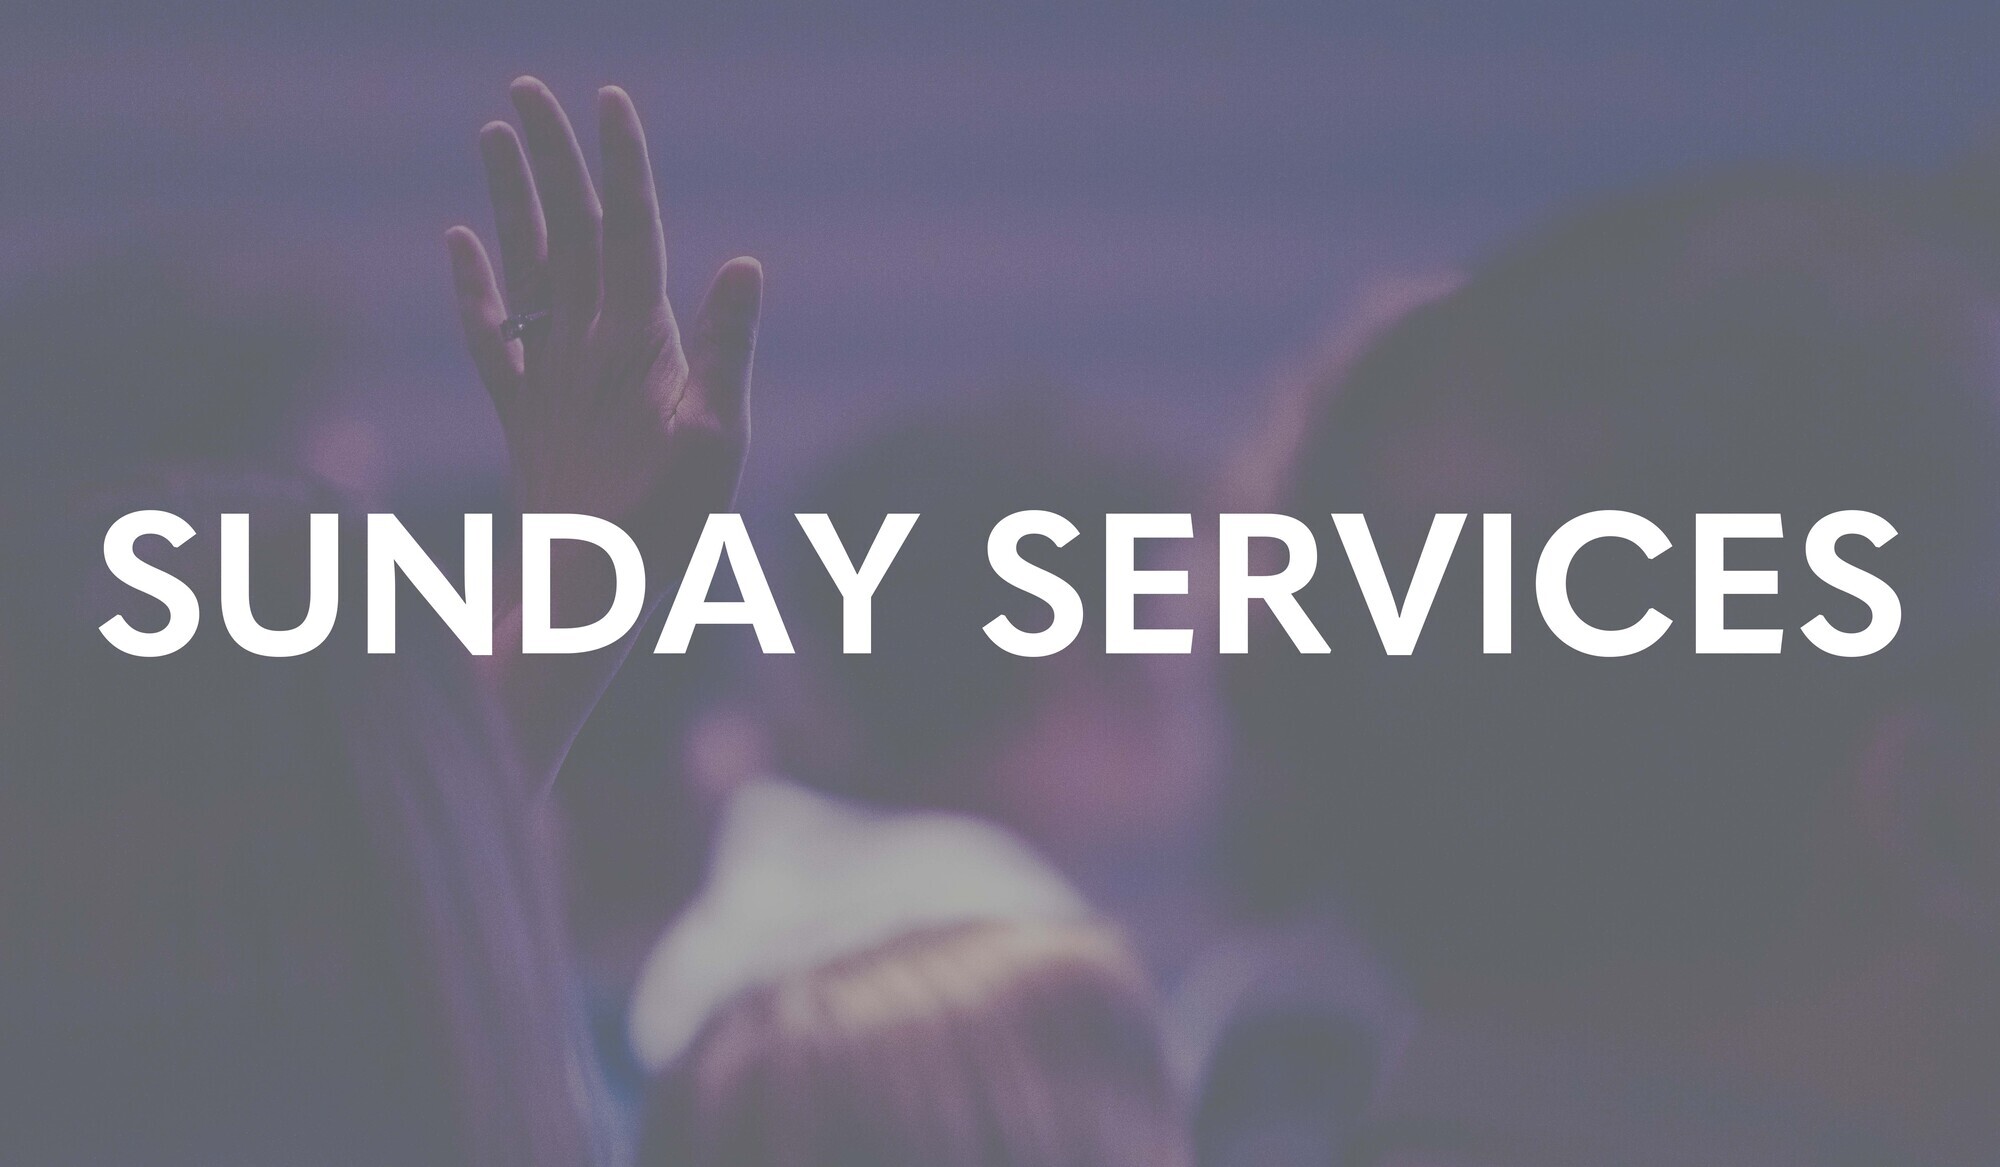 Sunday Services - Click to learn more